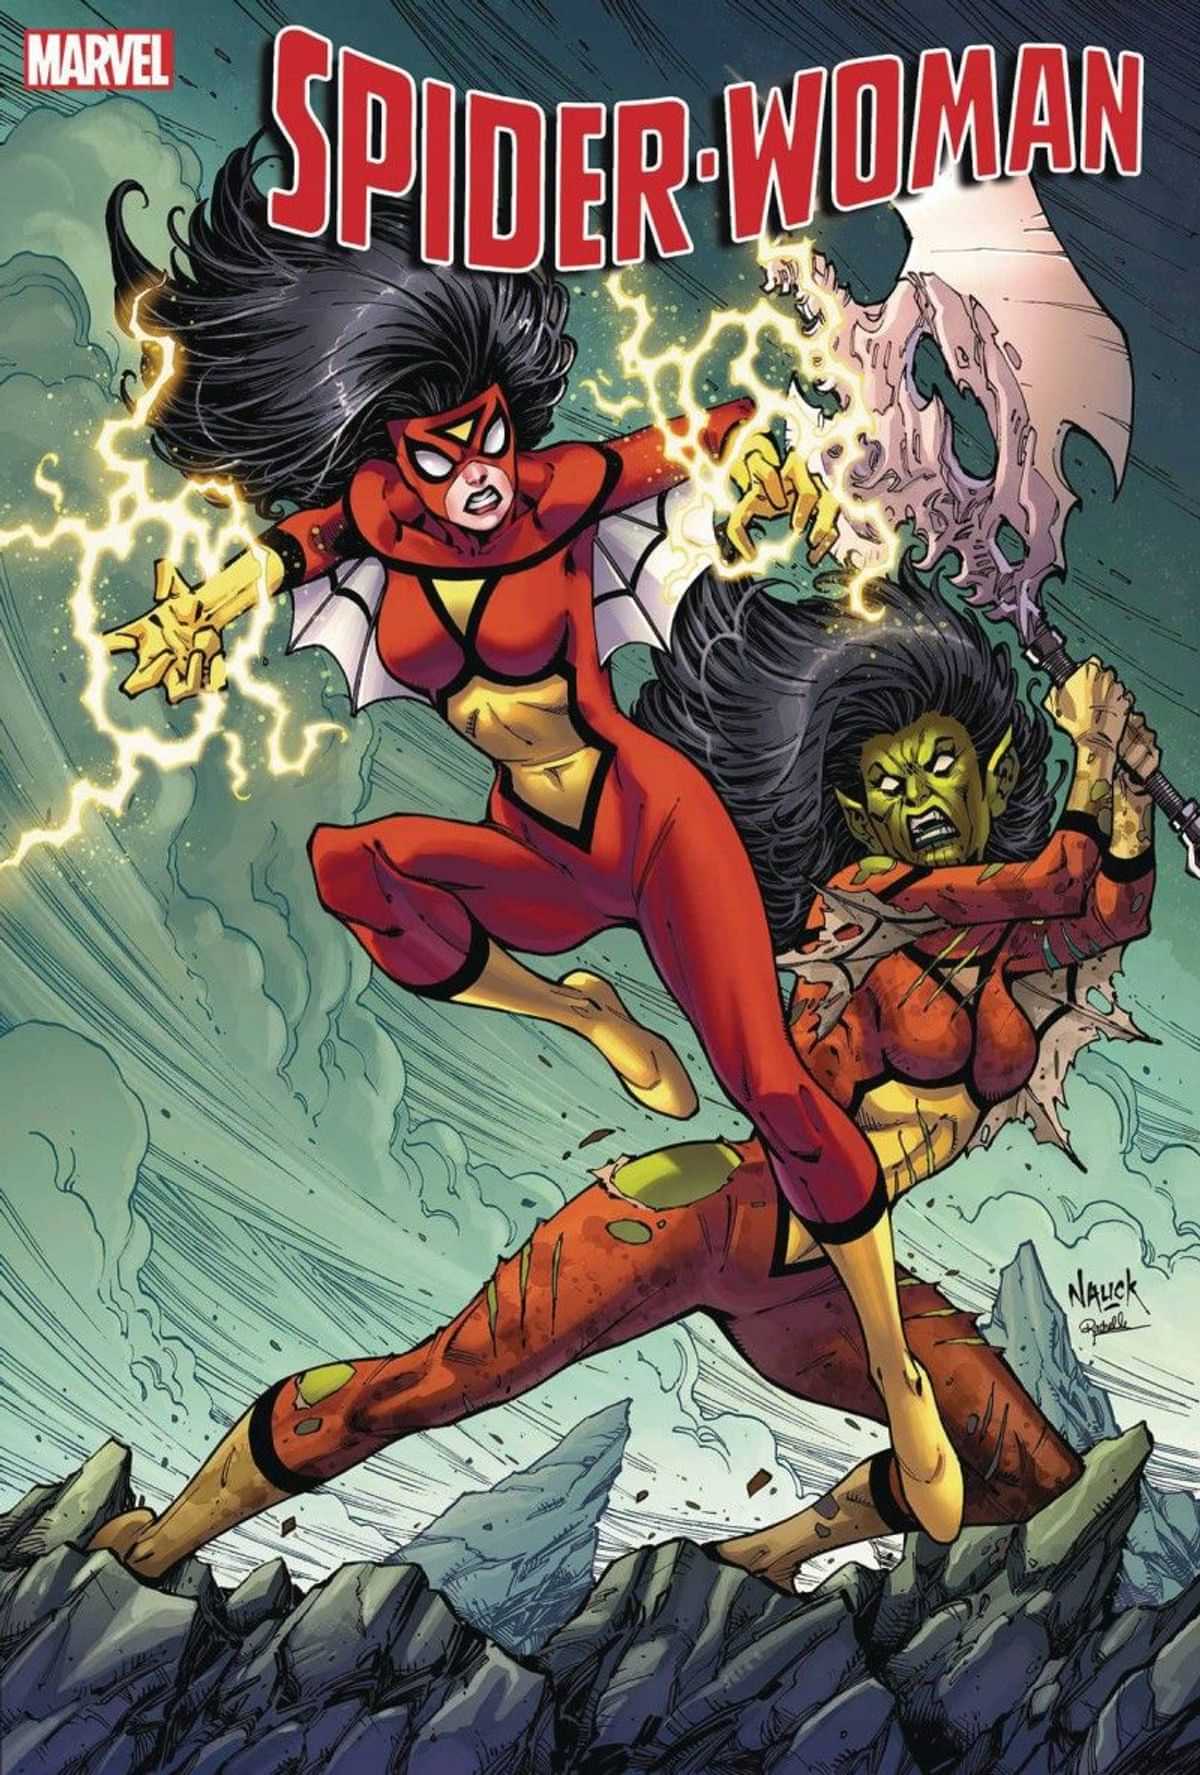 MARVEL COMICS SPIDER-WOMAN #1 YOON NEW COSTUME COVER 